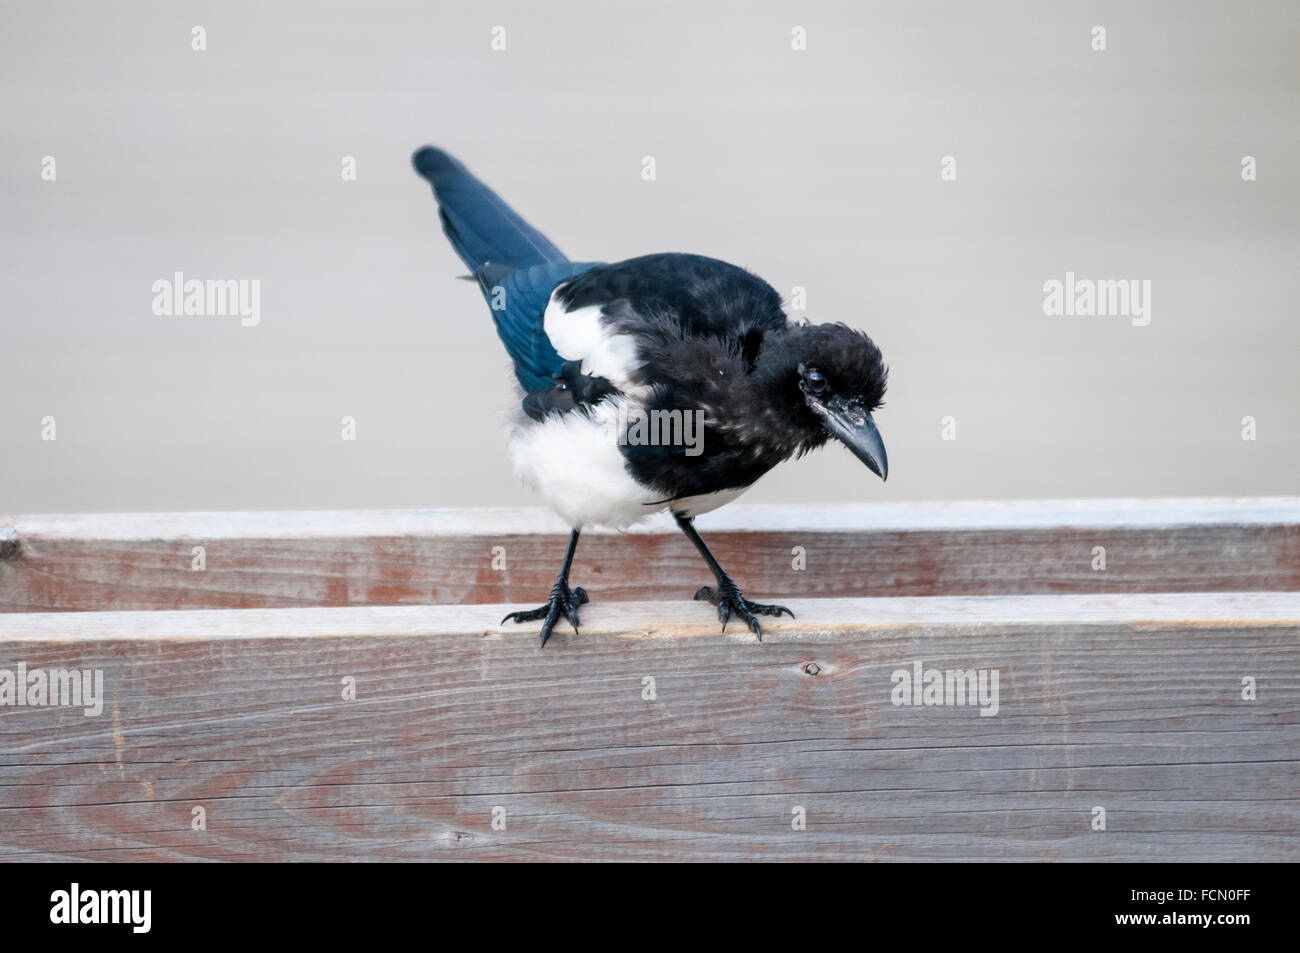 Adult Black-billed Magpie or American Magpie, Pica hudsonia, perched on a fence, Katmai, Alaska, USA, North America Stock Photo